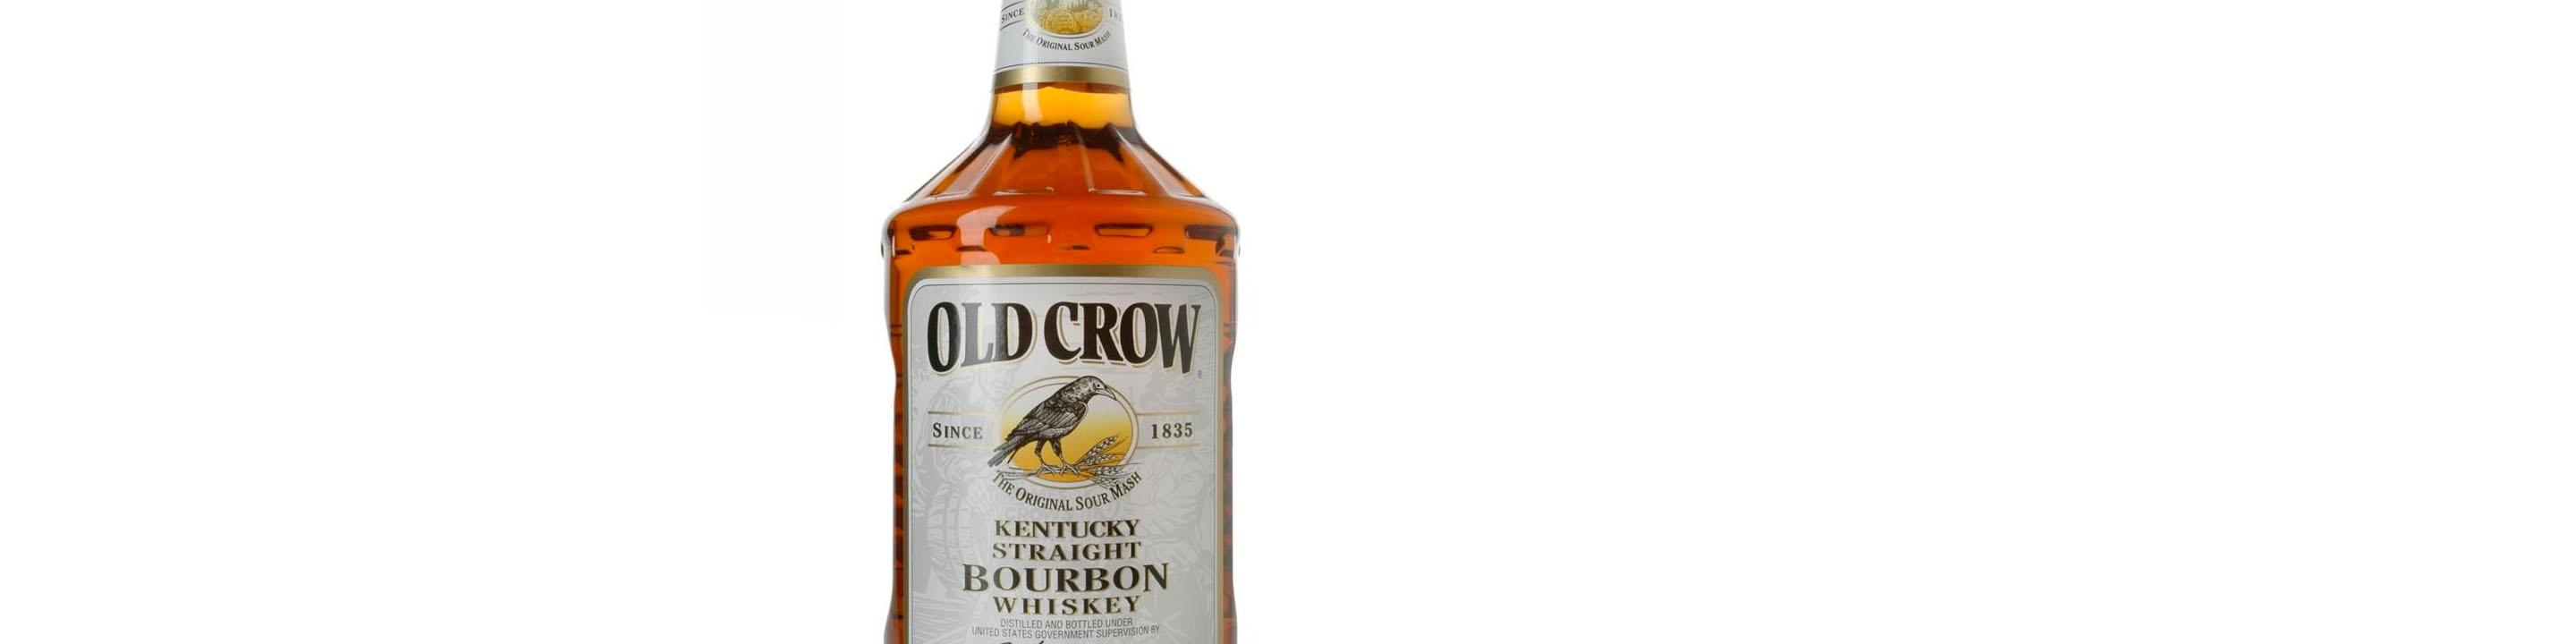 Old Crow® Bourbon is named for the inventor of the sour mash process, Dr. James C. Crow. In fact, in 1835 Old Crow® bourbon was the first bourbon to begin using this process that today, has become a standard in the bourbon industry. Old Crow® is the original sour mash bourbon.

Buy Old Crow online now from nearby liquor stores via Minibar Delivery. 